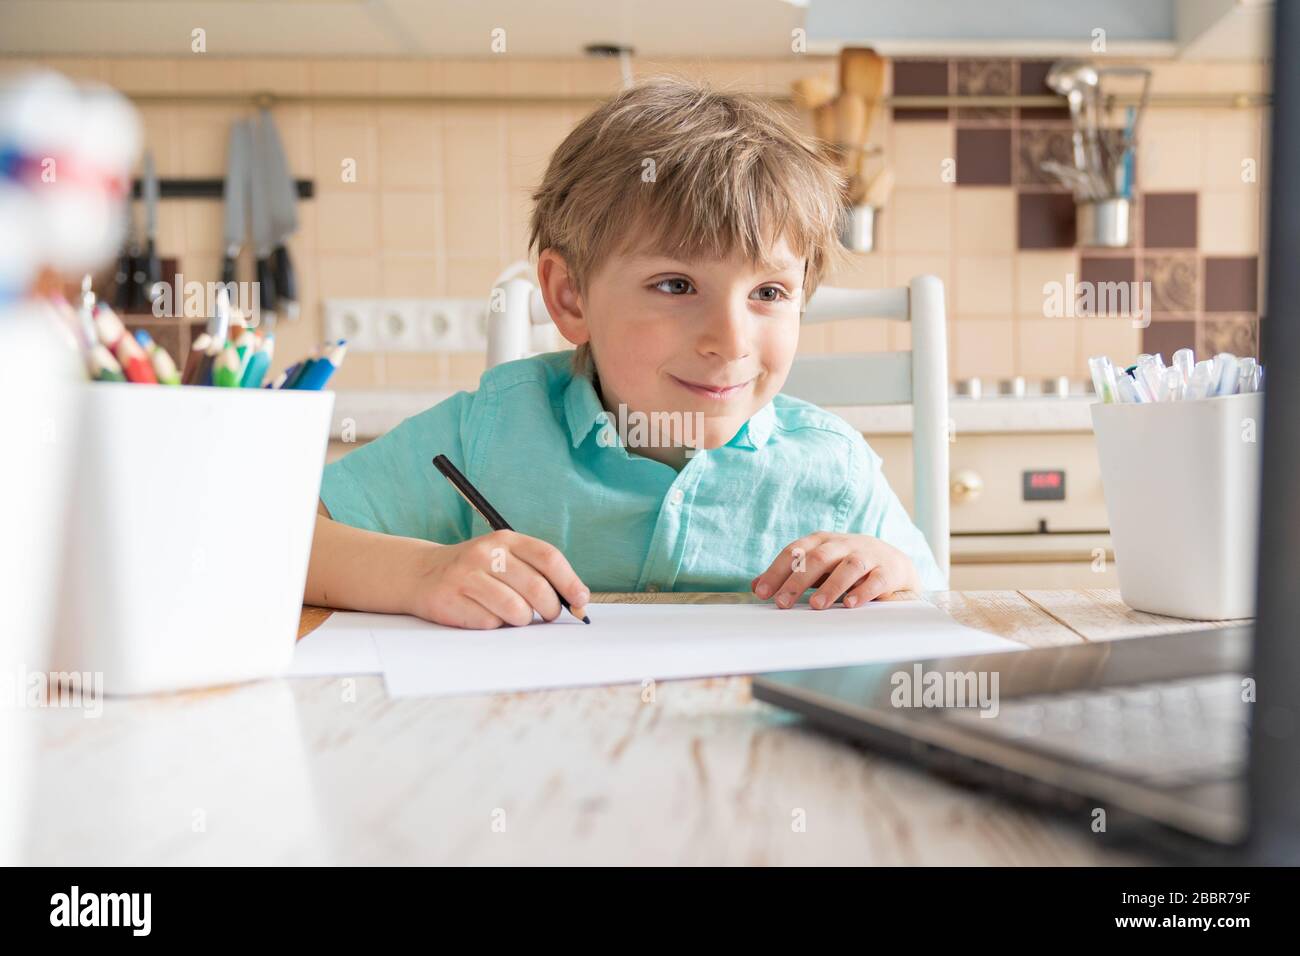 Covid lockdown - boy learns to draw online during self-isolation Stock Photo